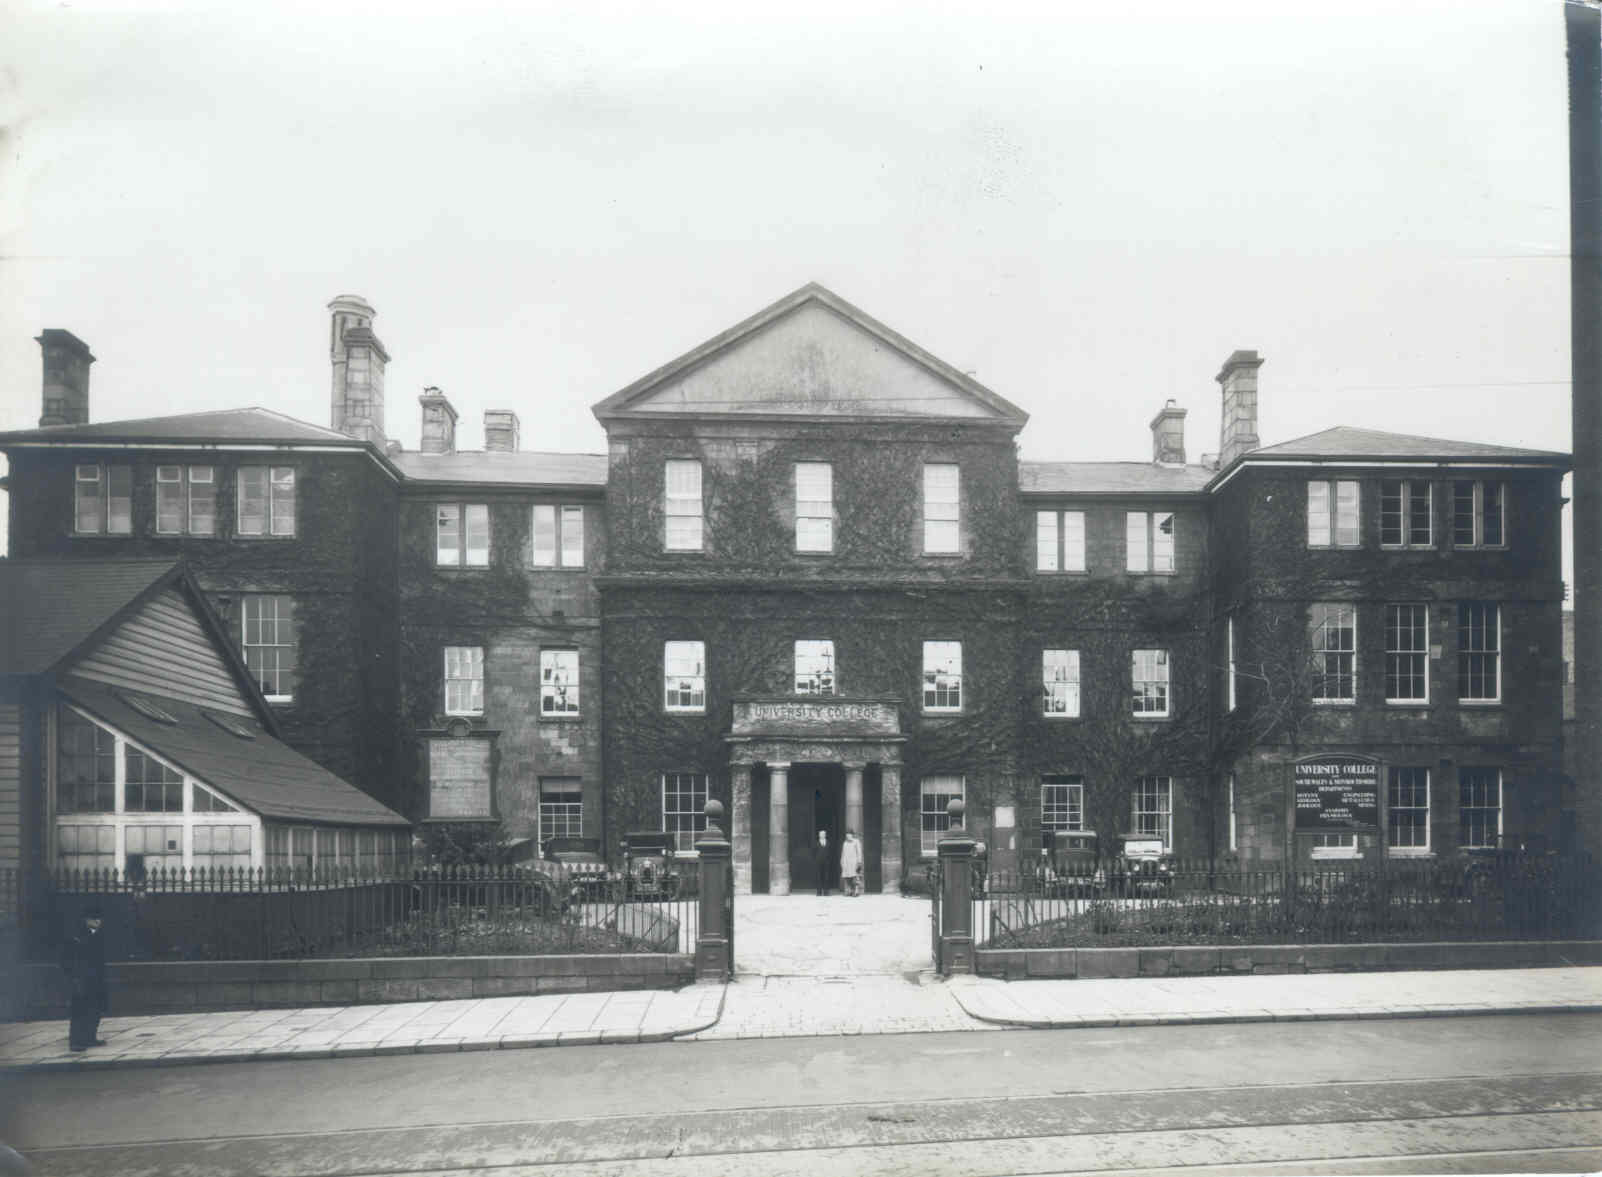 Photograph of the old college on Newport Road